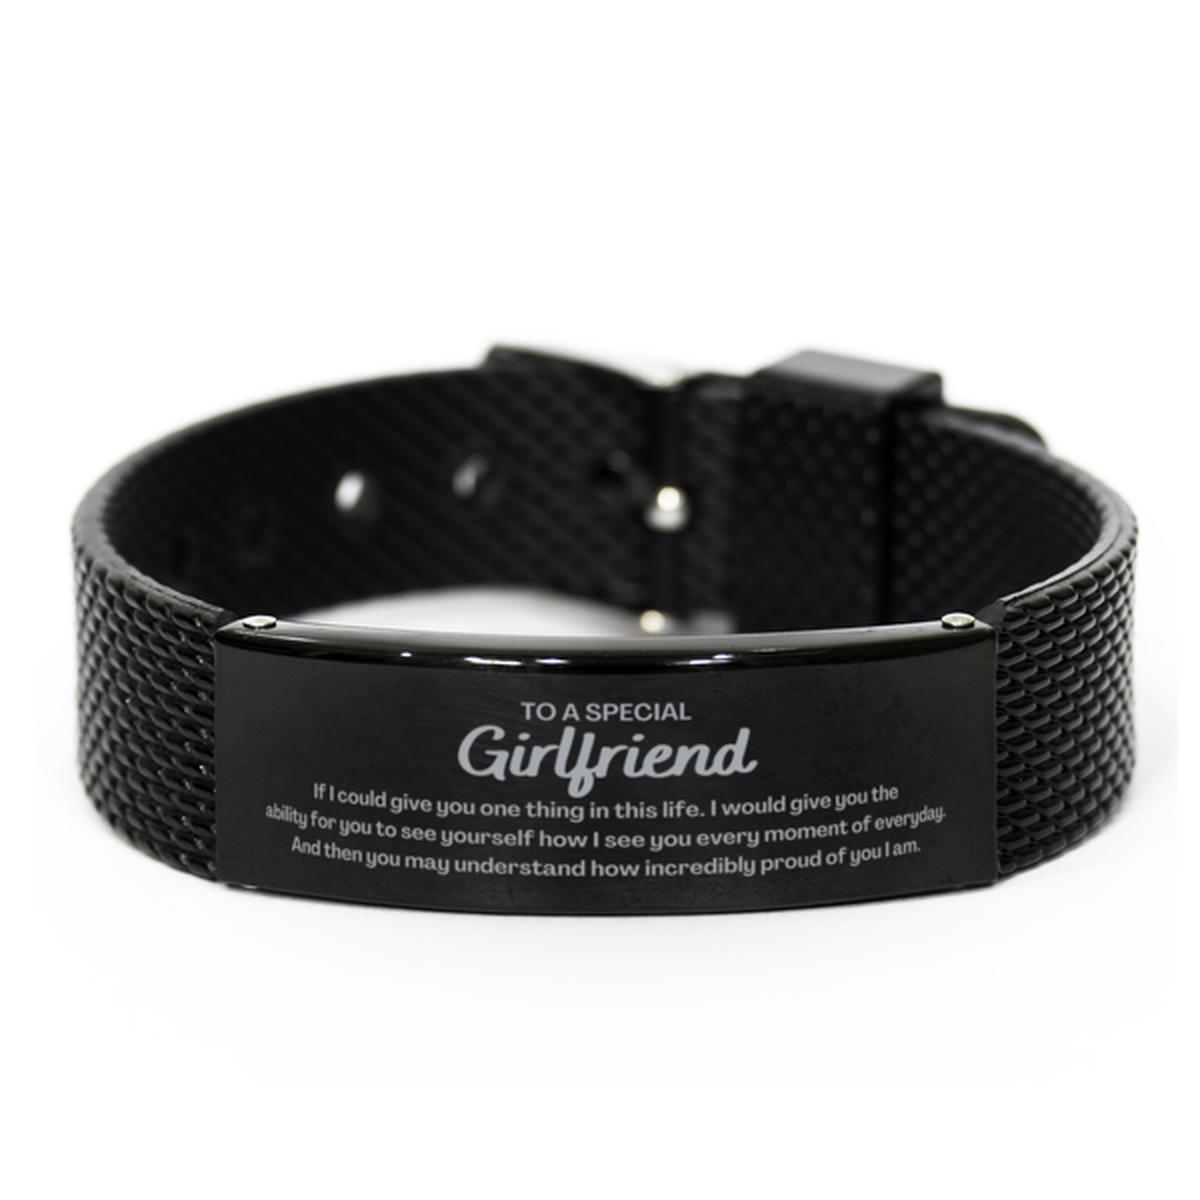 To My Girlfriend Black Shark Mesh Bracelet, Gifts For Girlfriend Engraved, Inspirational Gifts for Christmas Birthday, Epic Gifts for Girlfriend To A Special Girlfriend how incredibly proud of you I am